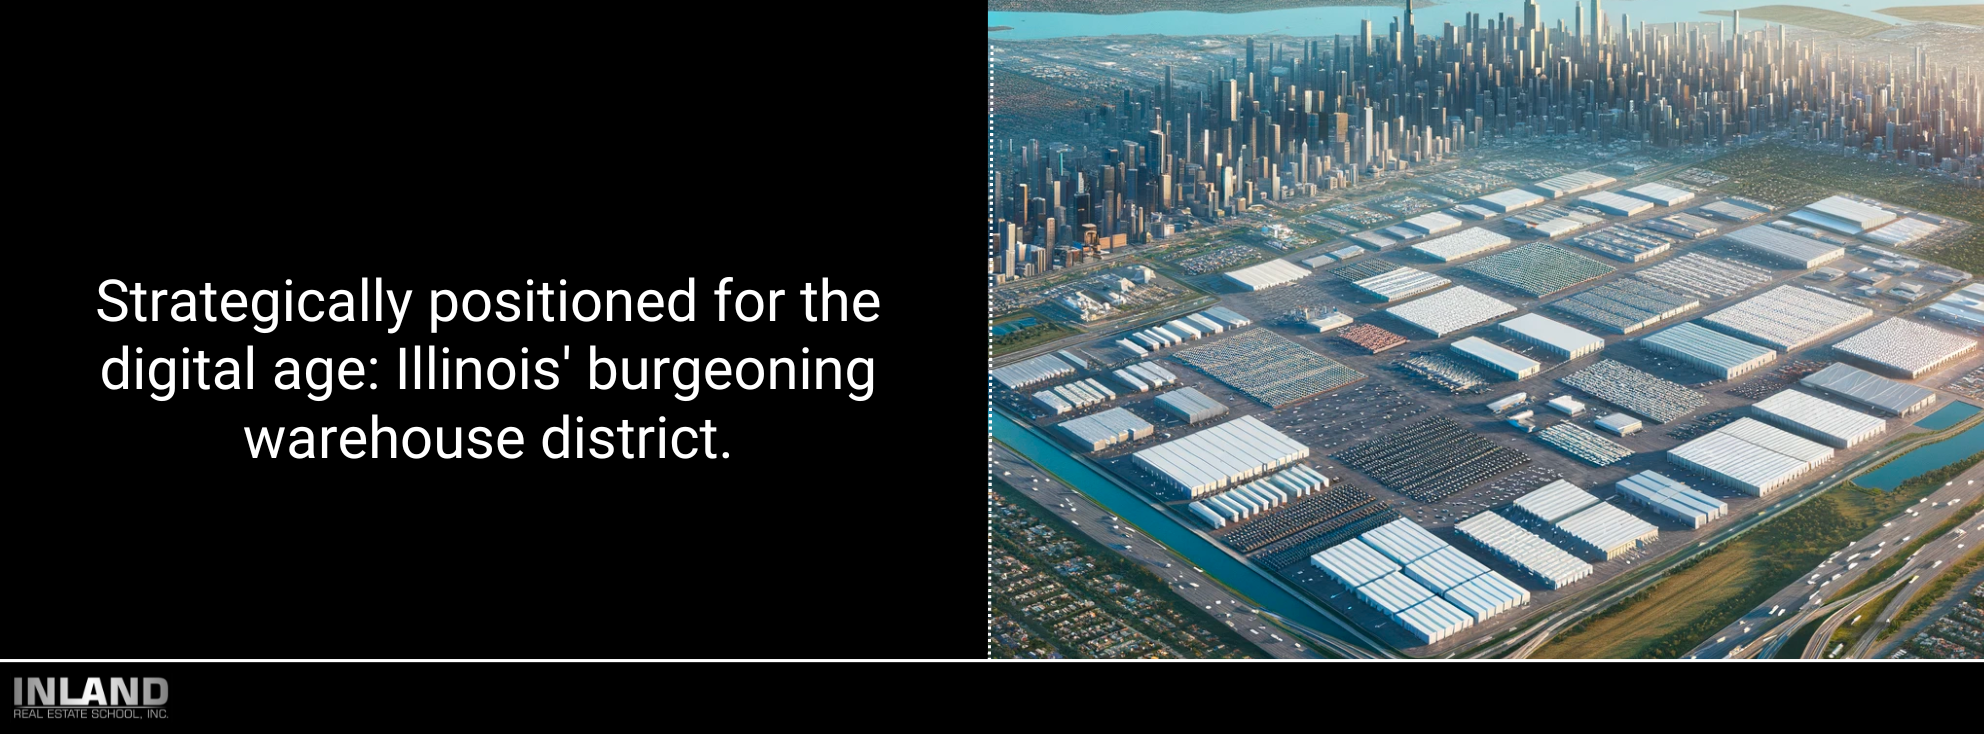 Strategically positioned for the digital age: Illinois’ burgeoning warehouse district.